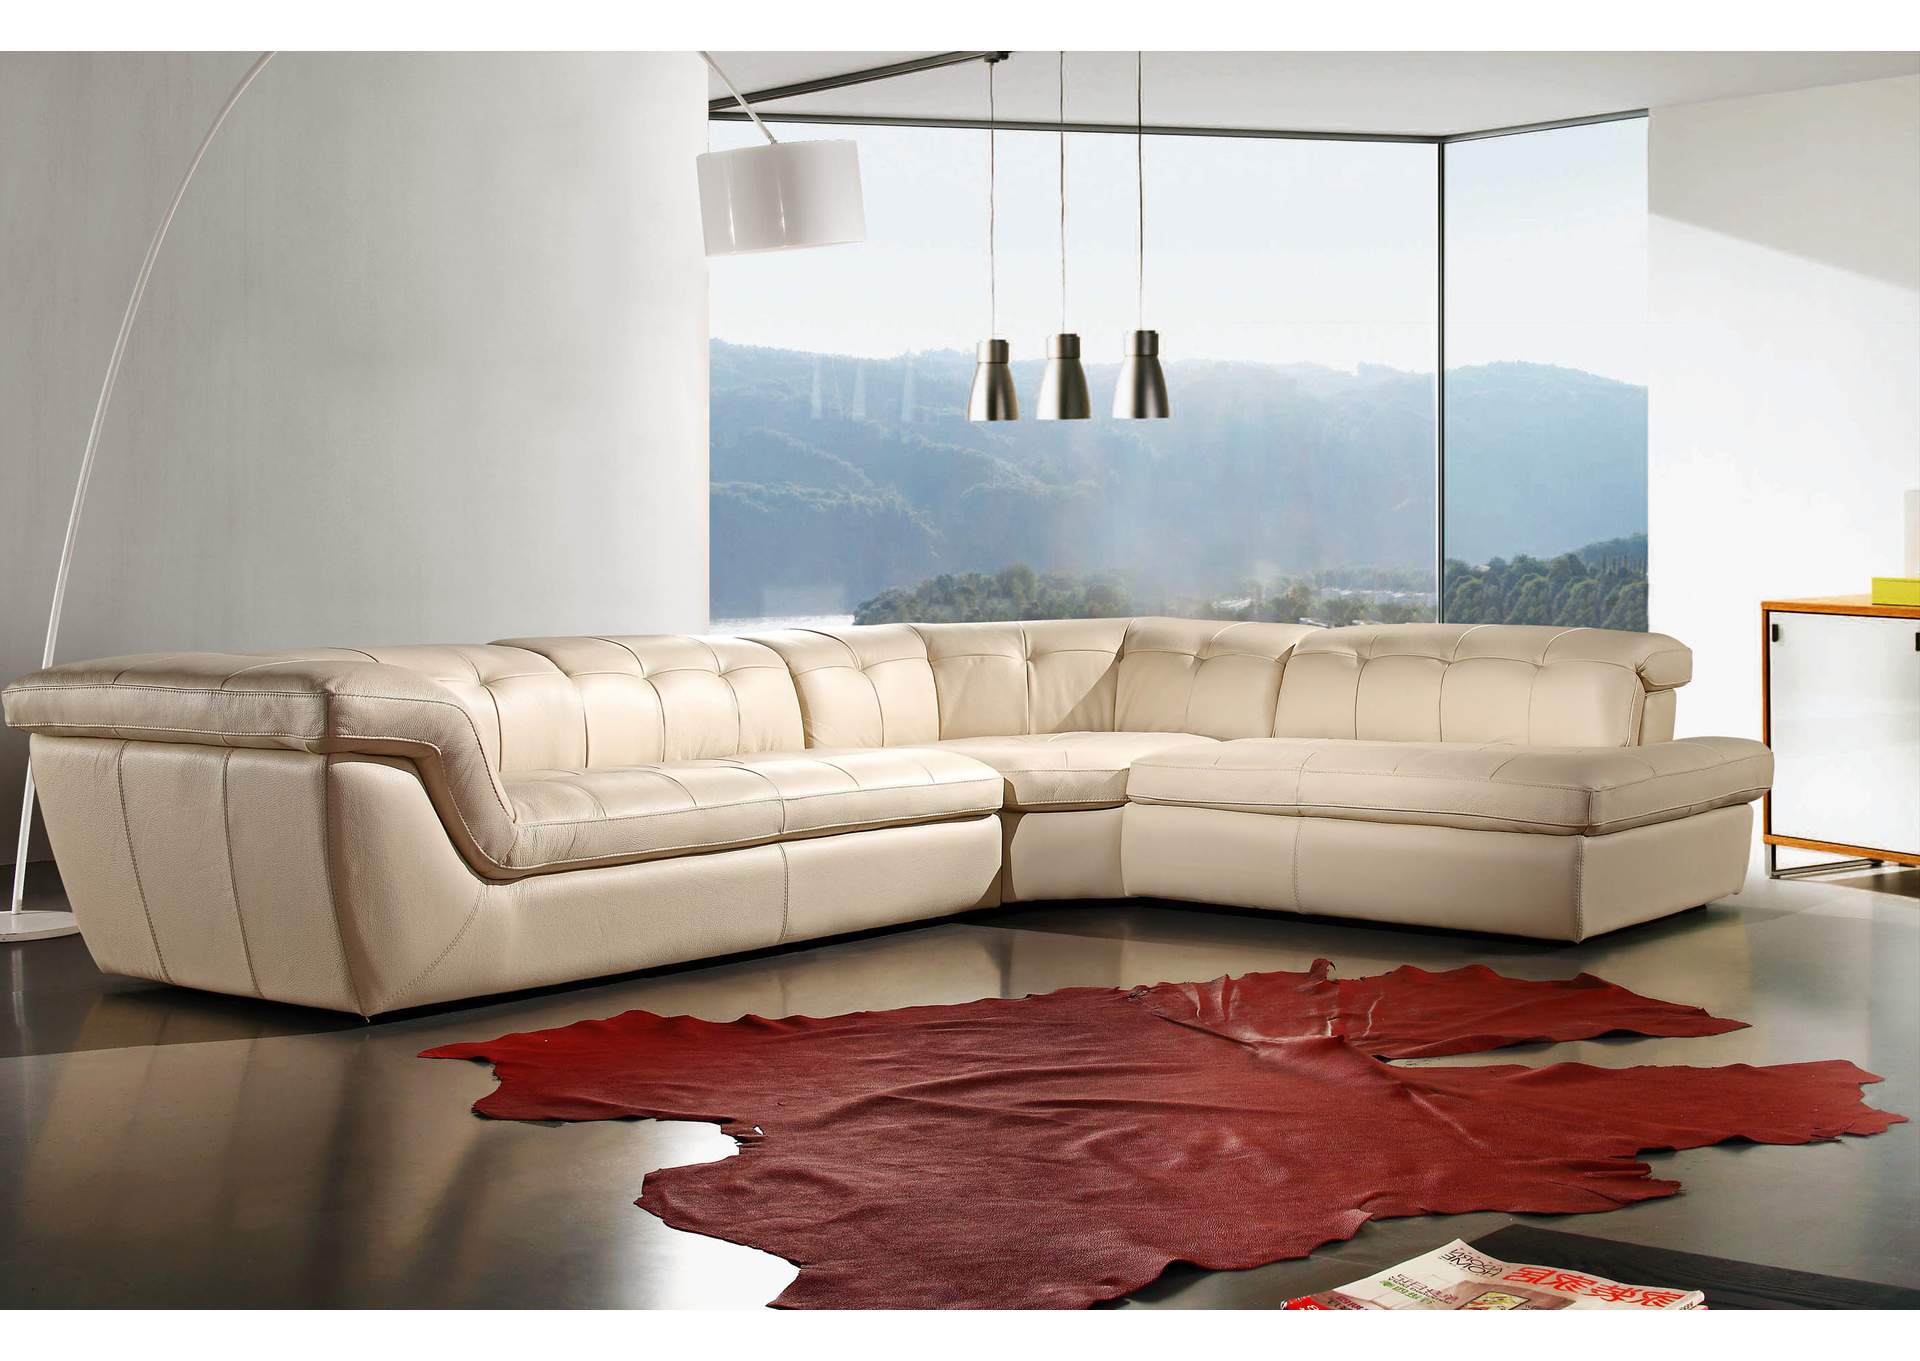 Italian Leather Sectional Beige Color, Italian Leather Sectional With Chaise